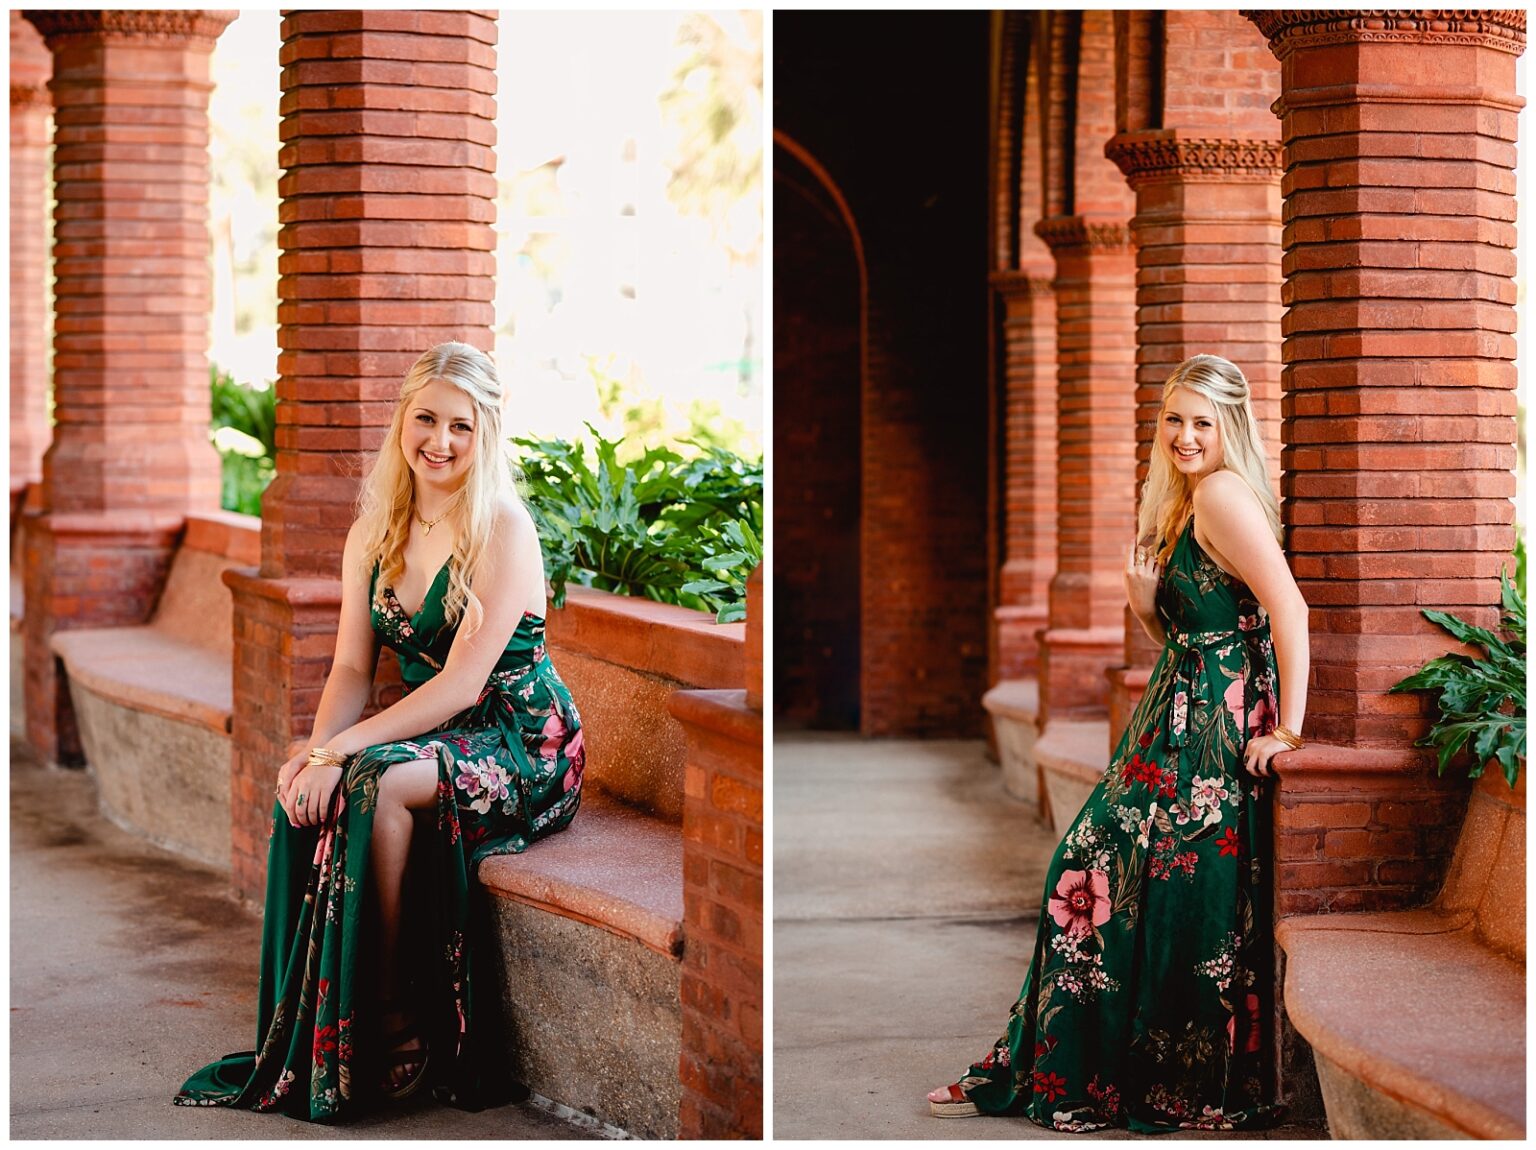 St Augustine historic town, Florida. Senior photos with historic buildings. Green floral dress for senior picture outfit.